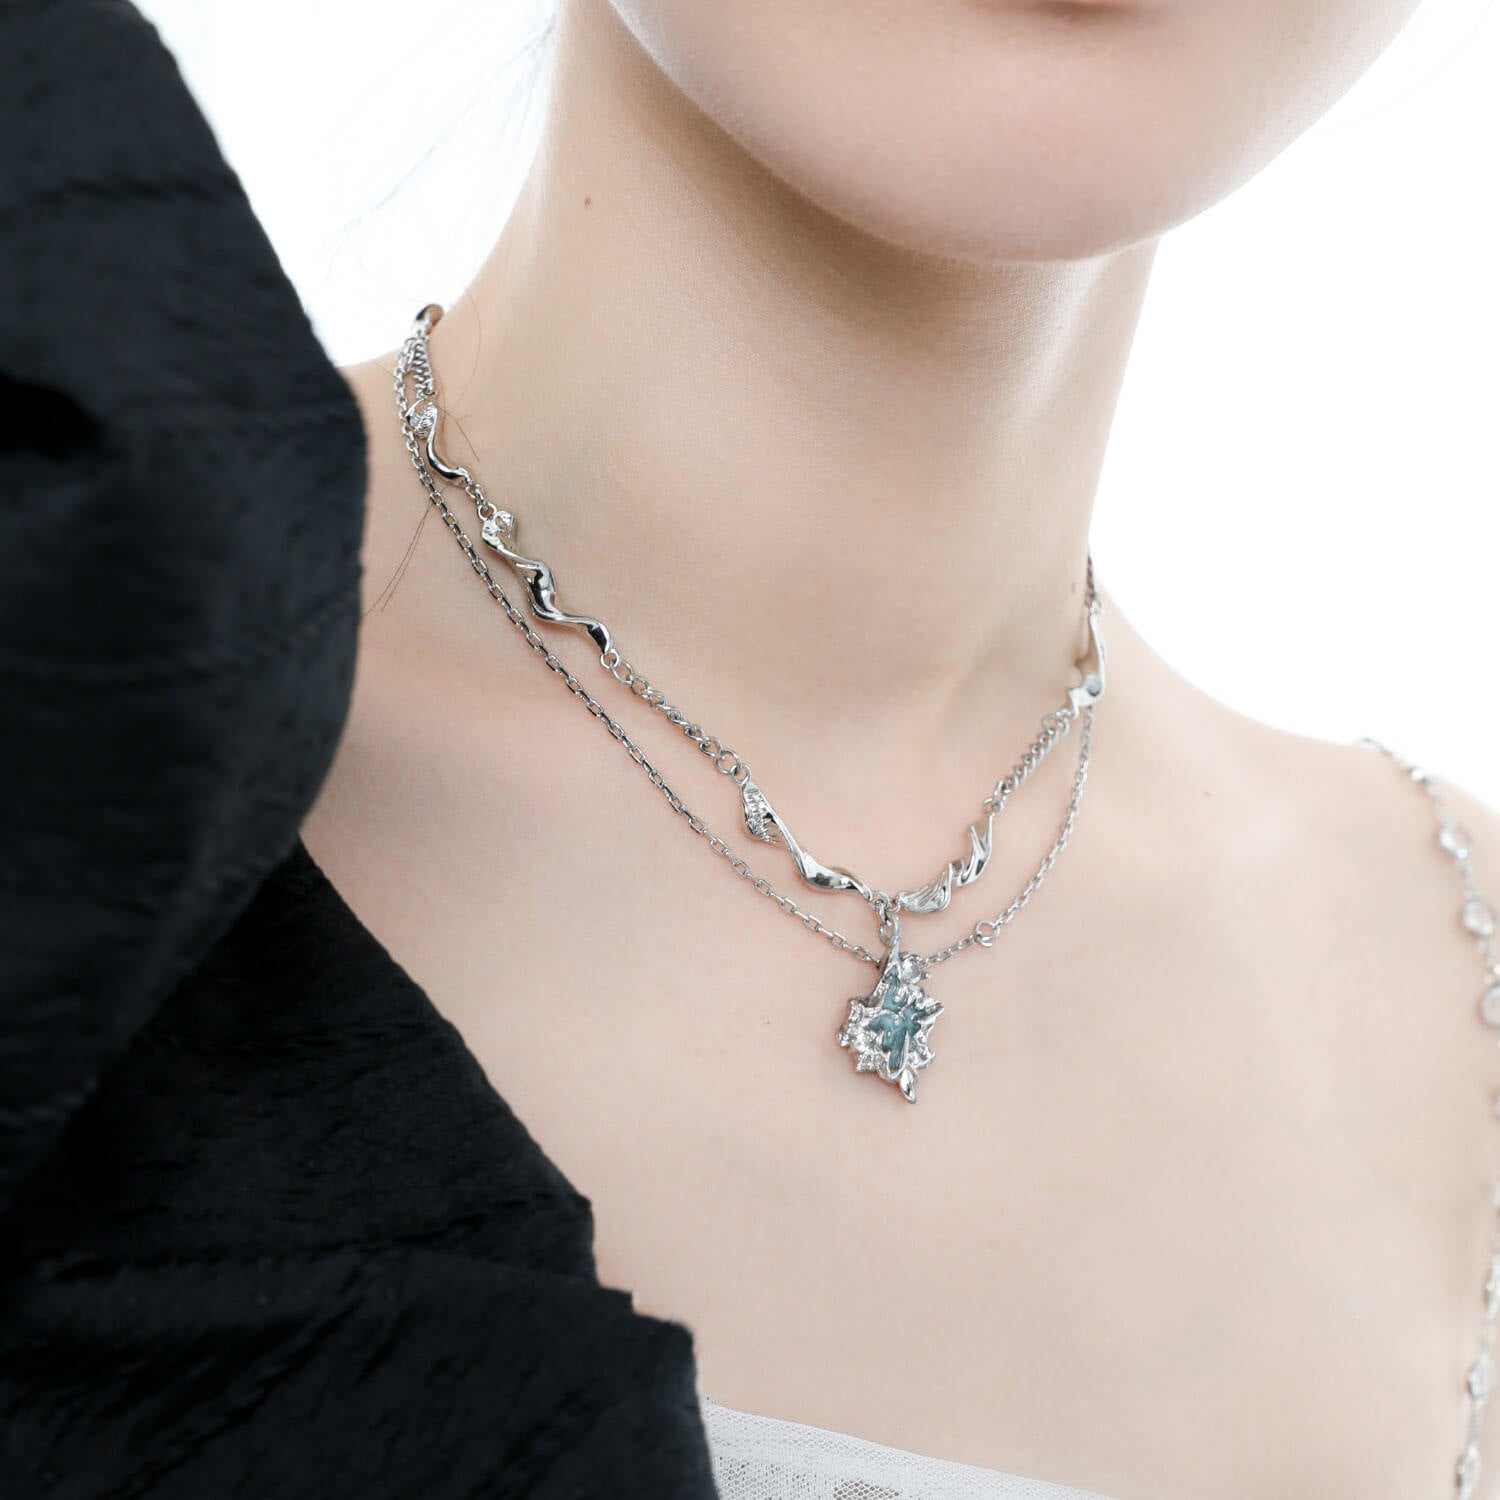 Iceberg Necklace Double Clavicle Chain  Buy at Khanie